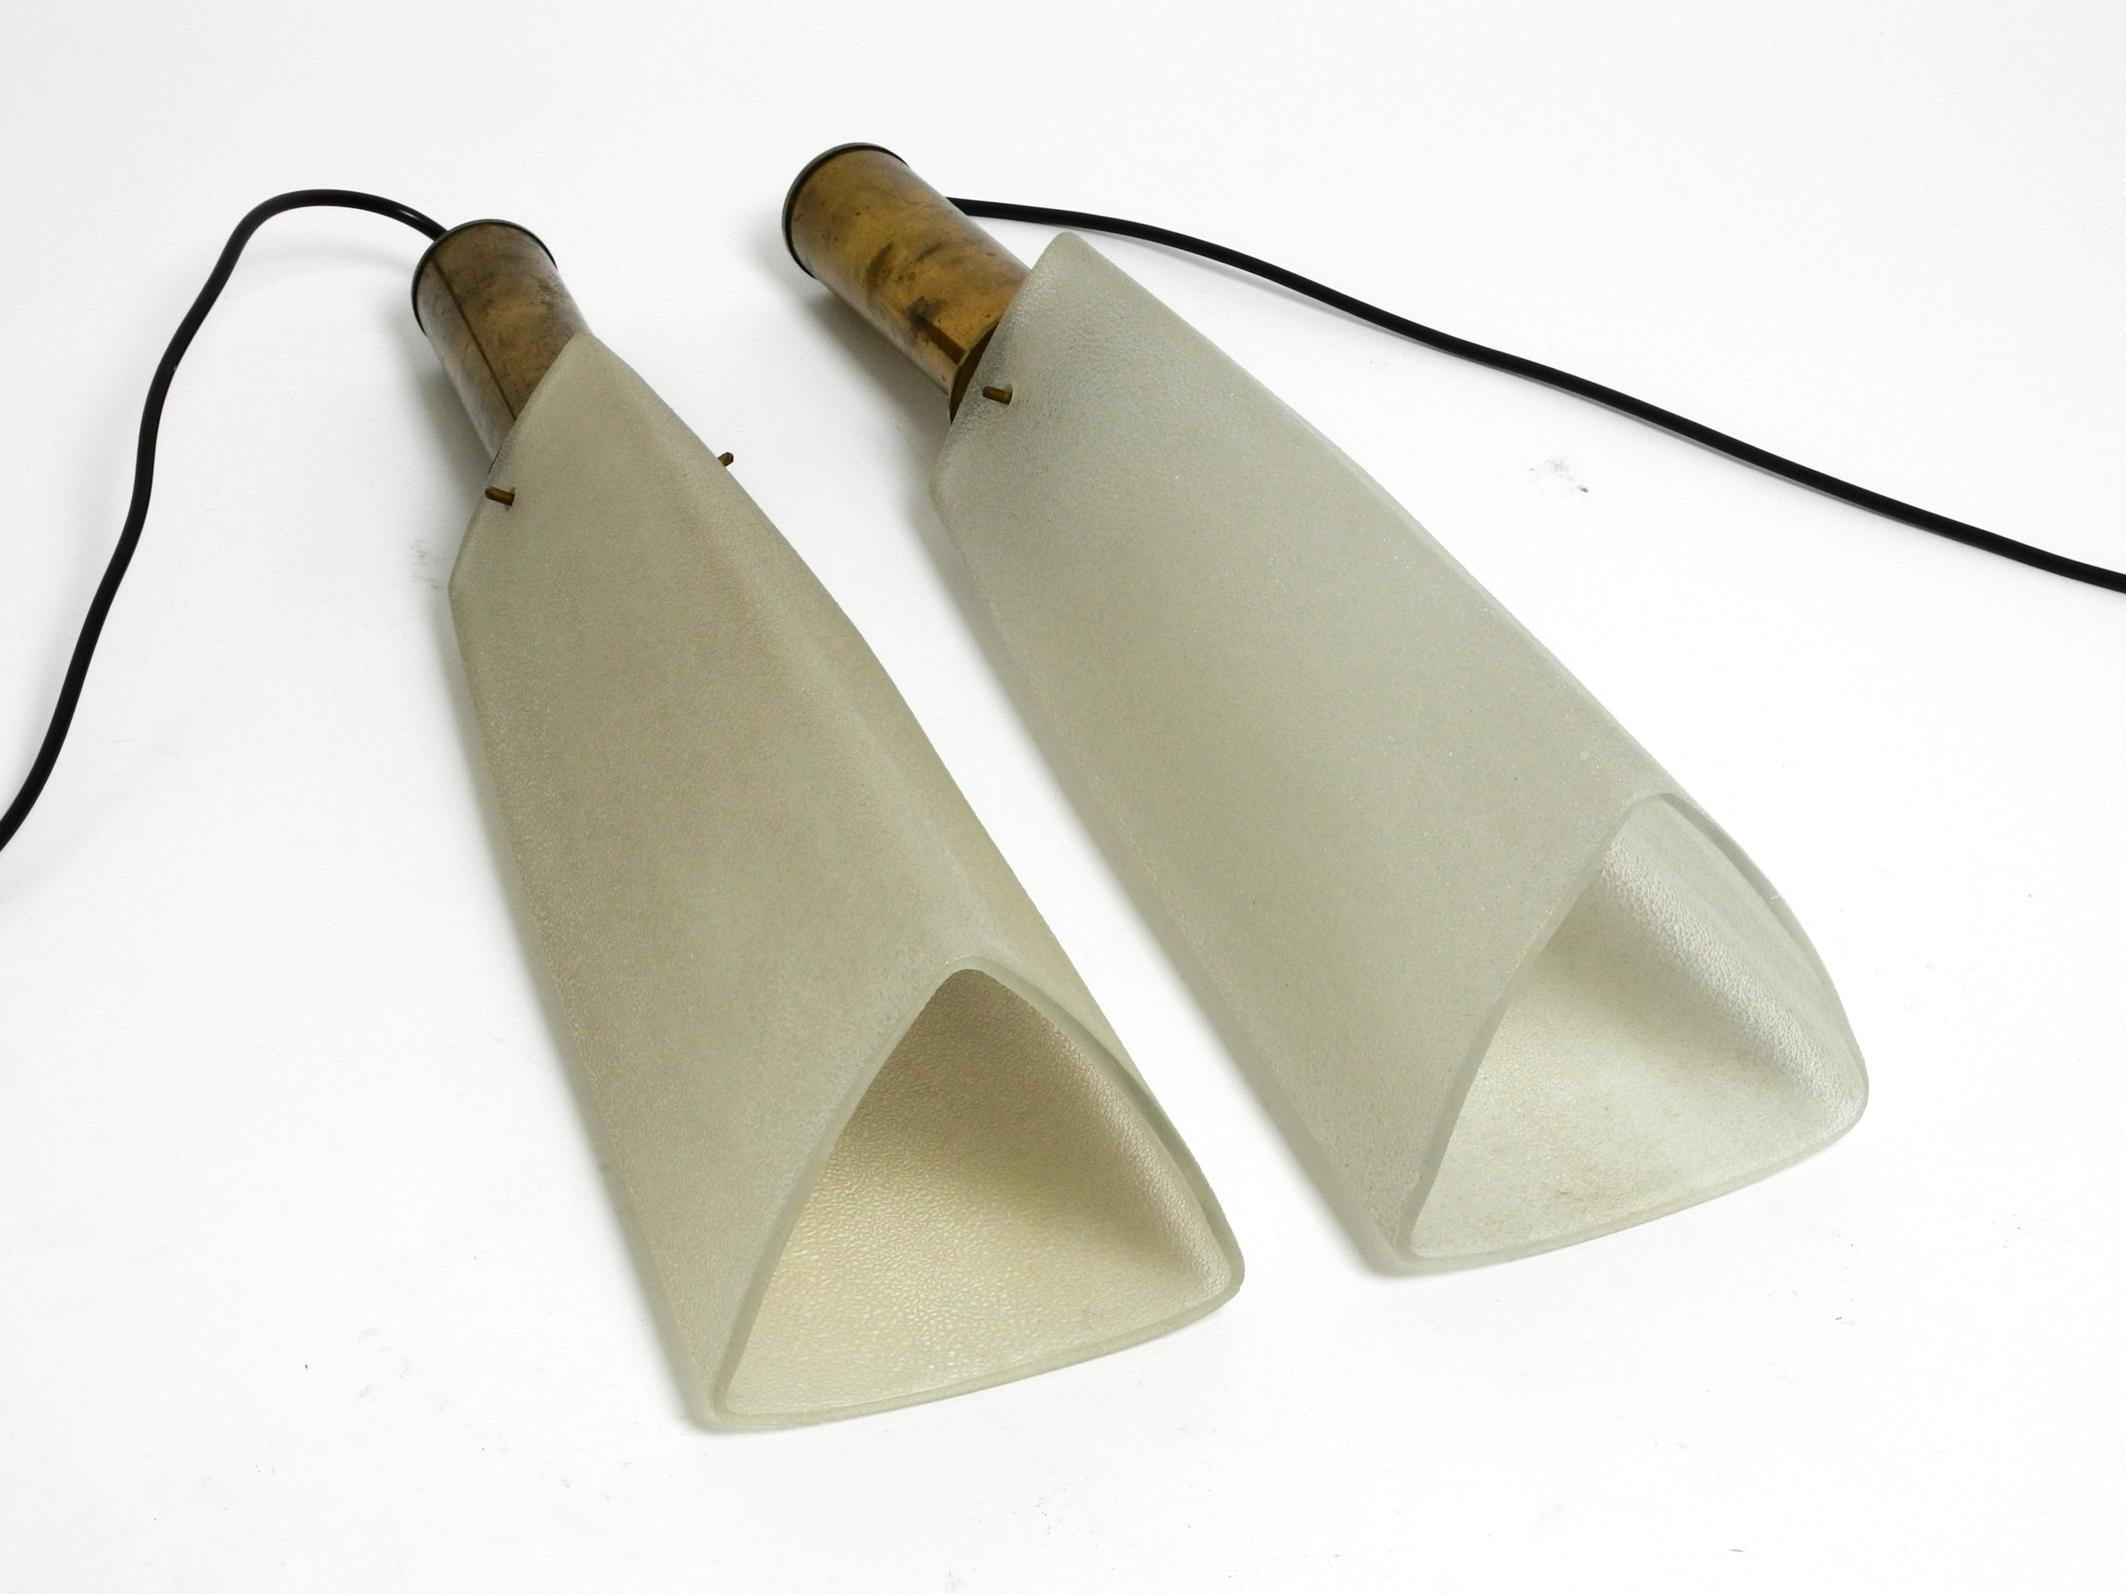 Two beautiful very rare Mid Century Modern brass pendant lamps with long triangular glass lampshades. From a Danish production.
On both original sockets is written 